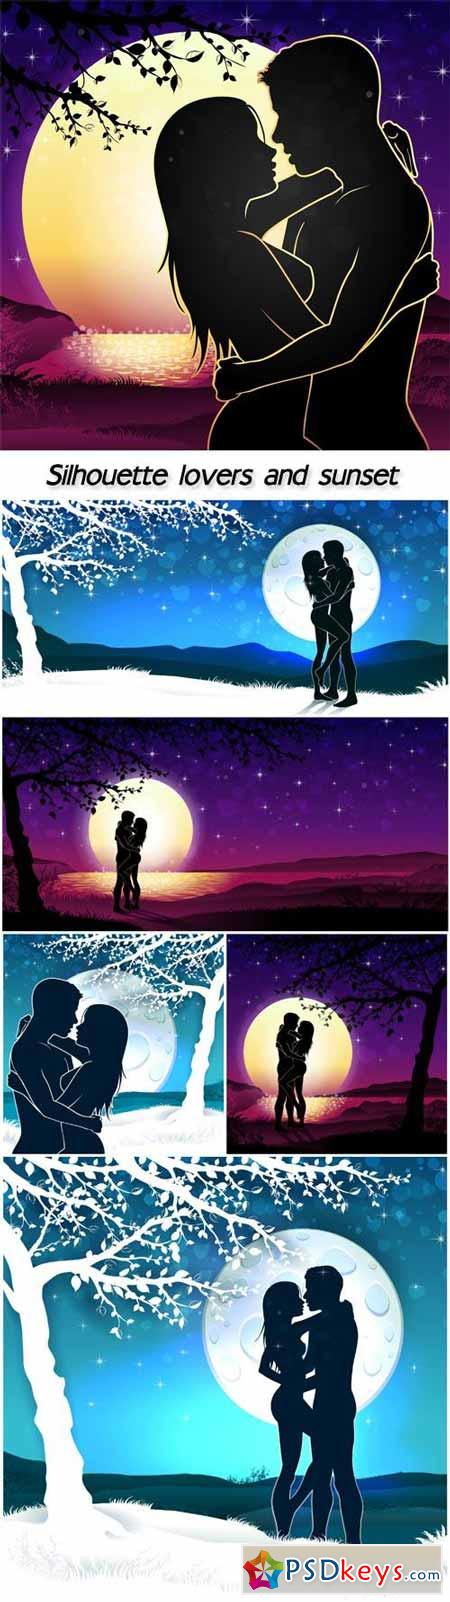 Silhouette lovers and sunset